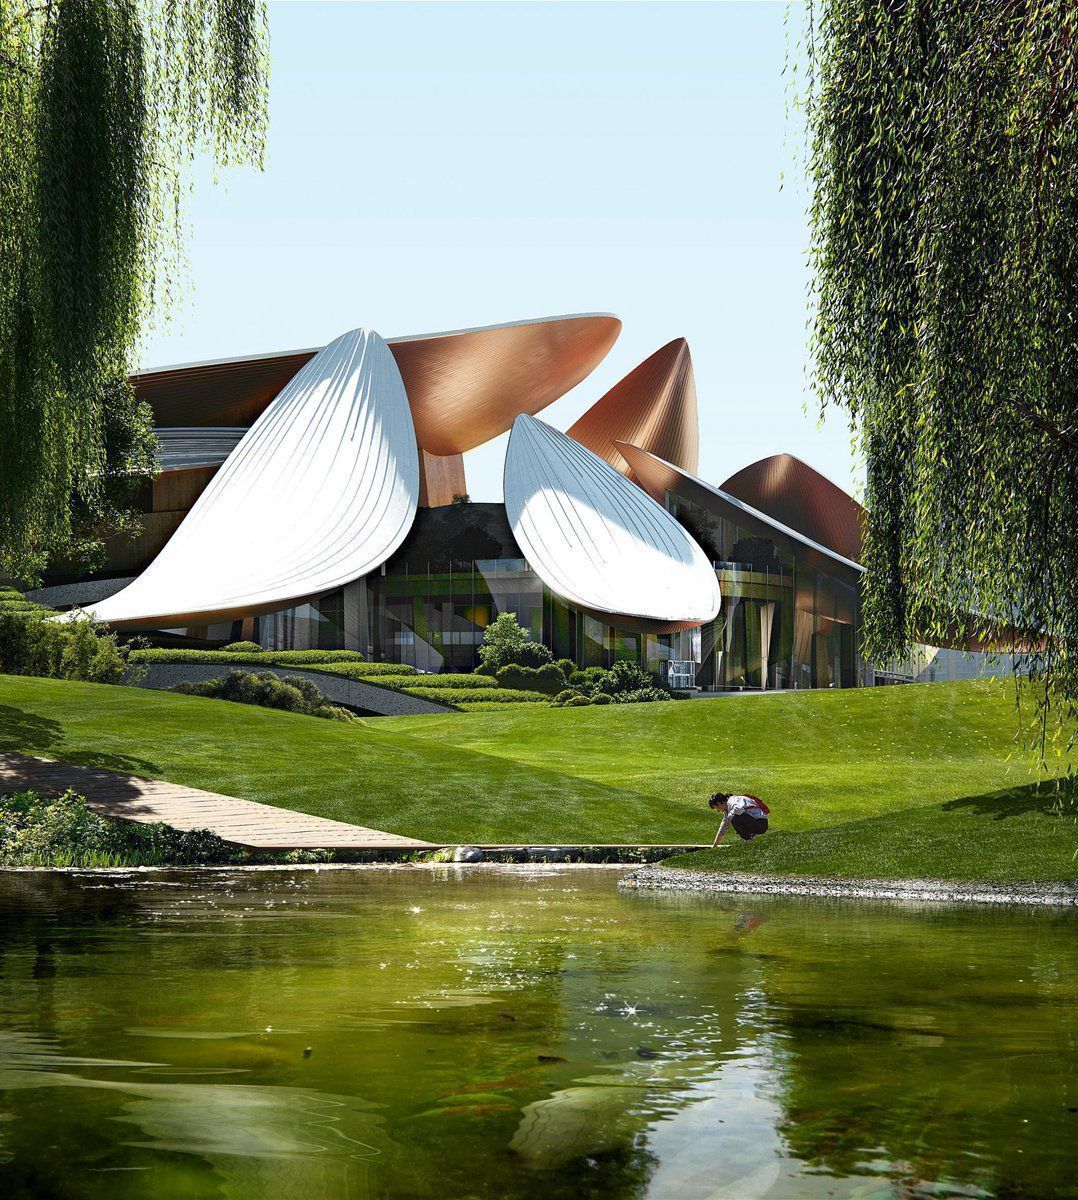 This bamboo leaf-inspired arts centre is set to be constructed in China. Designed by MAD Architects and located in the country’s Zhejiang province, the building’s massing is also intended to reference the nearby Anji tea-growing hills. Works are due to complete in 2025.